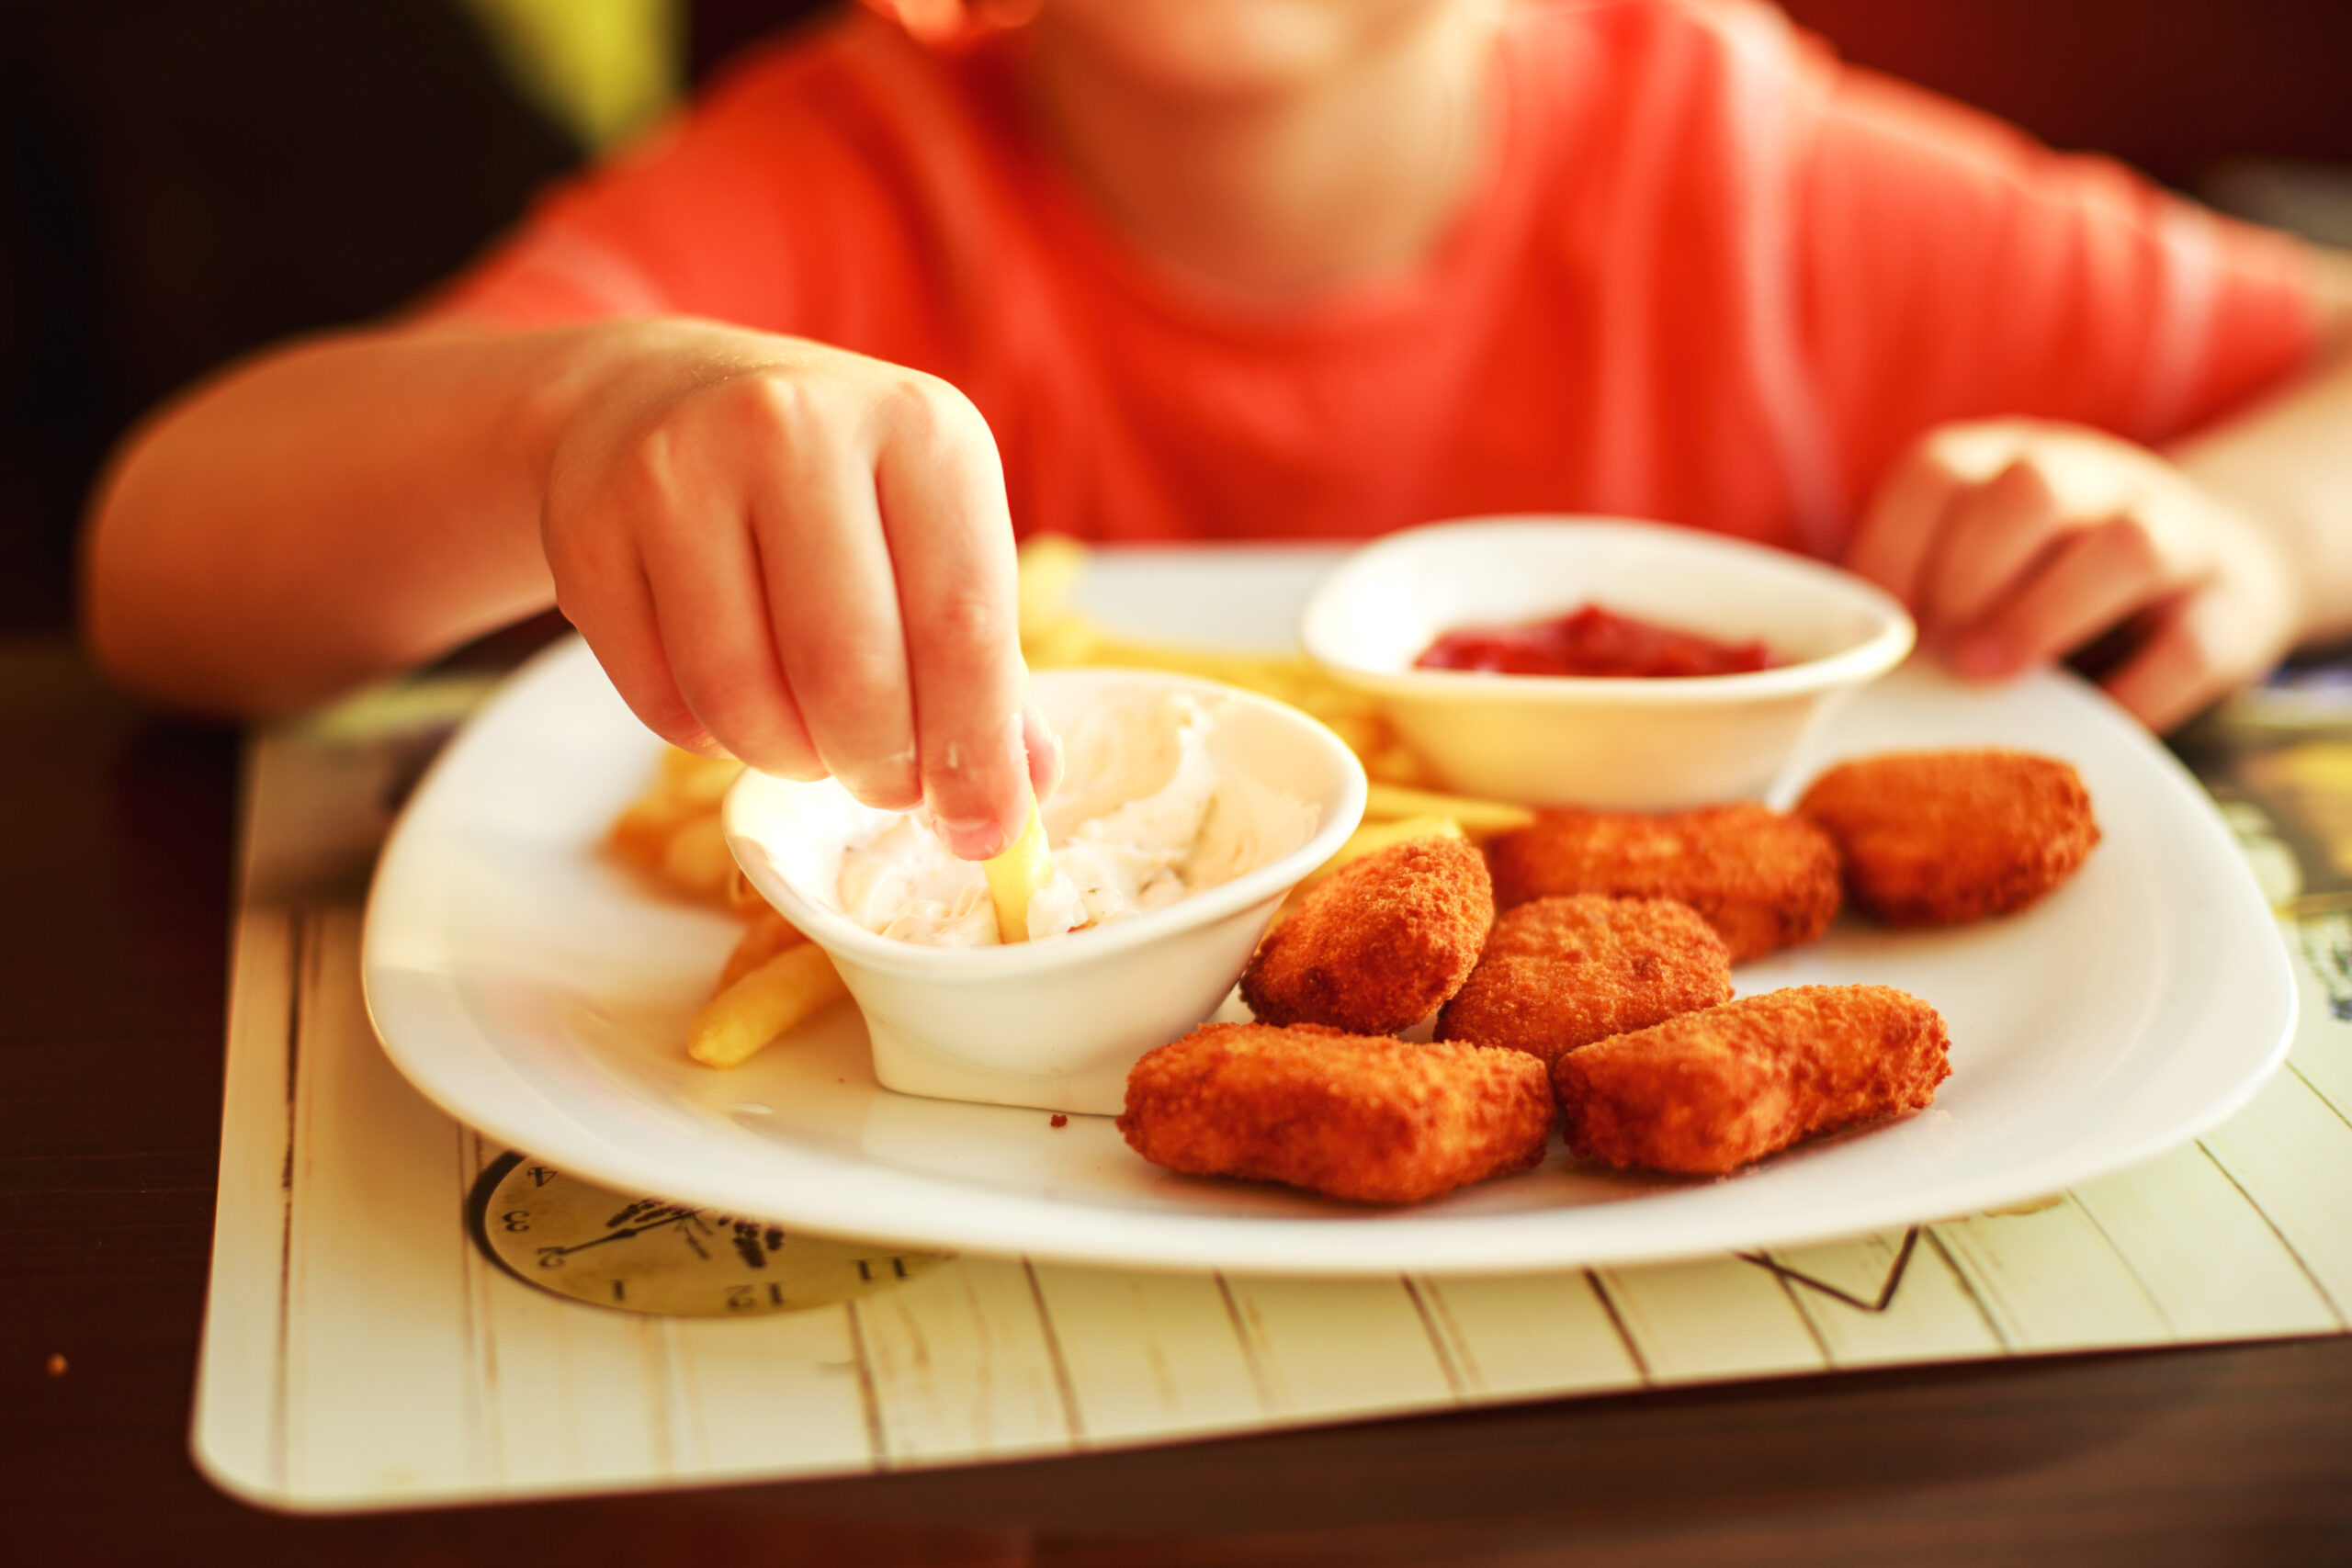 boy-eating-fast-food-in-a-cafe-the-child-eating-french-fries-with-nuggets